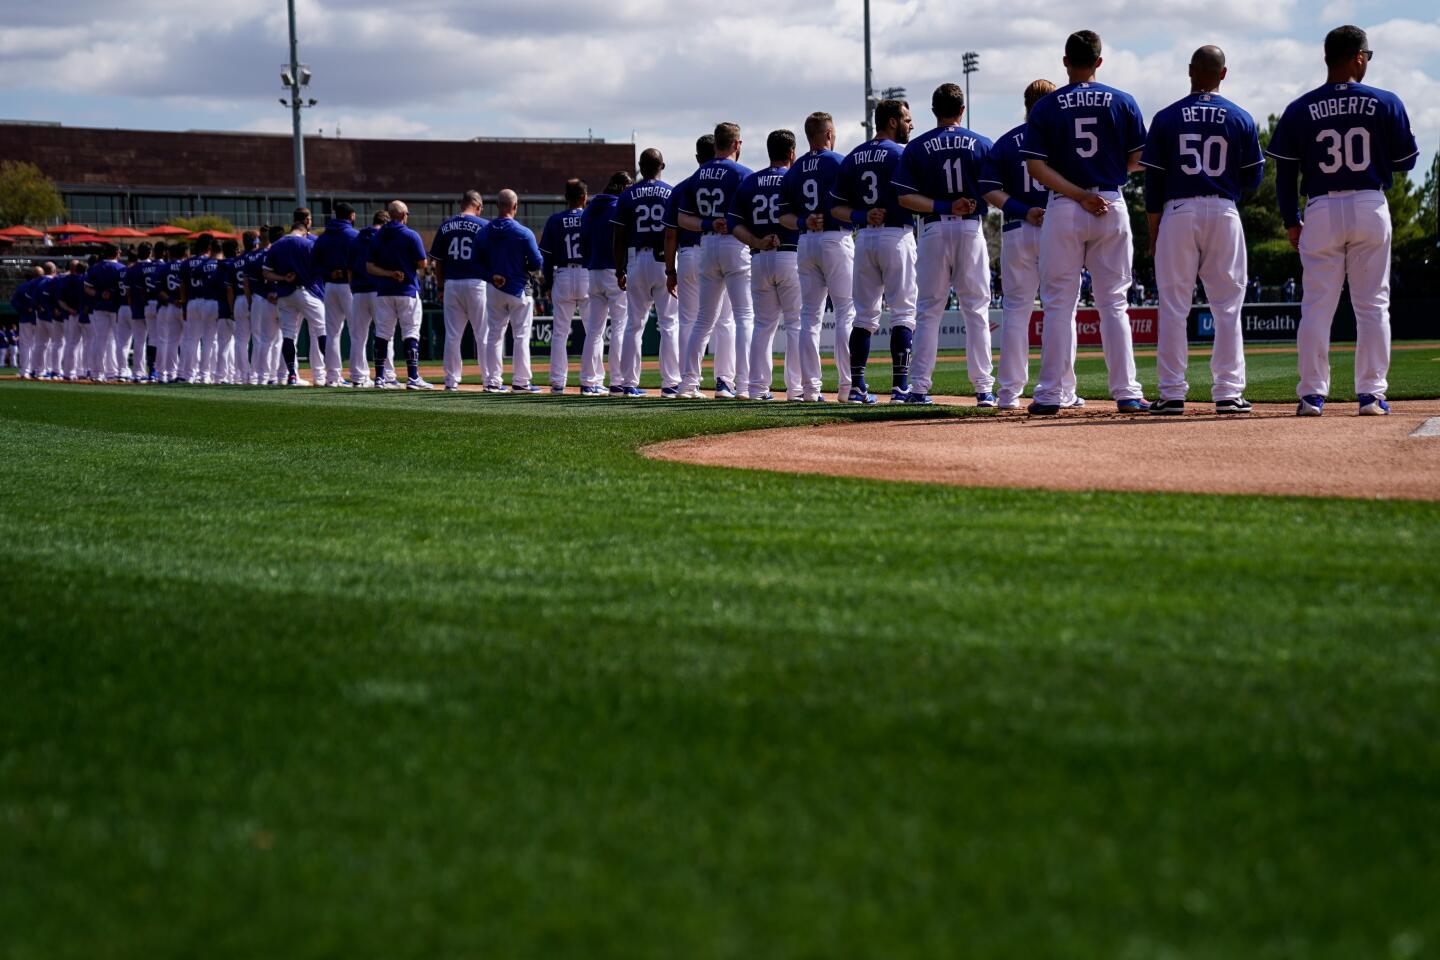 Dodgers players stand along the third base line during the singing of the national anthem before an exhibition game against the Chicago Cubs at Camelback Ranch on Feb. 23, 2020.